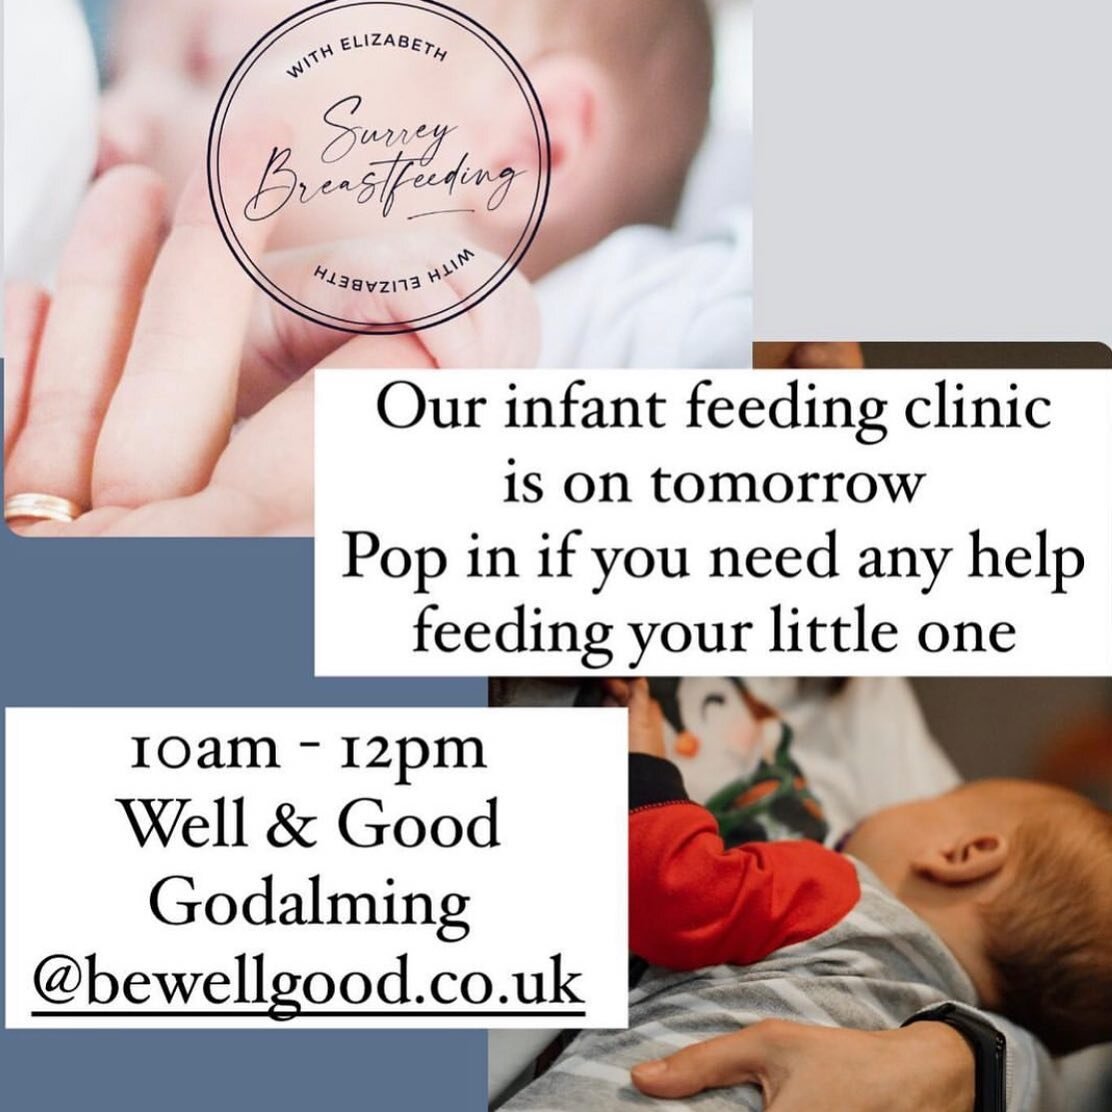 See you tomorrow 10am - 12pm at @bewellgood.co.uk 💜 any infant feeds questions are welcome, nothing is ever a silly question 🤗